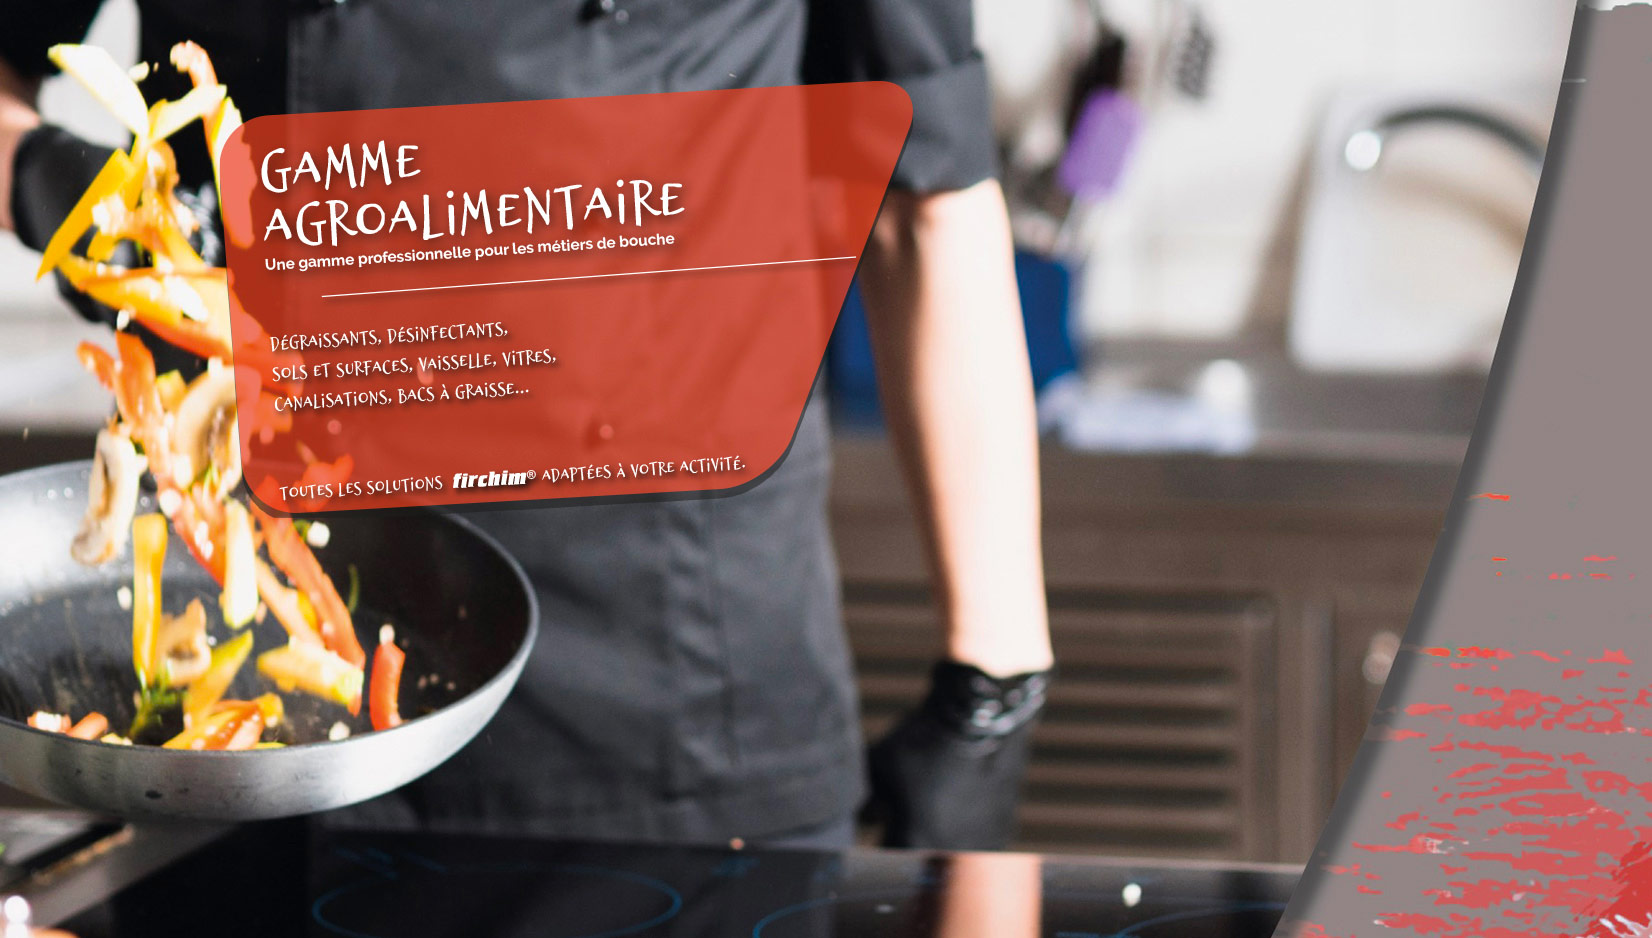 Gamme Agroalimentaire - HACCP